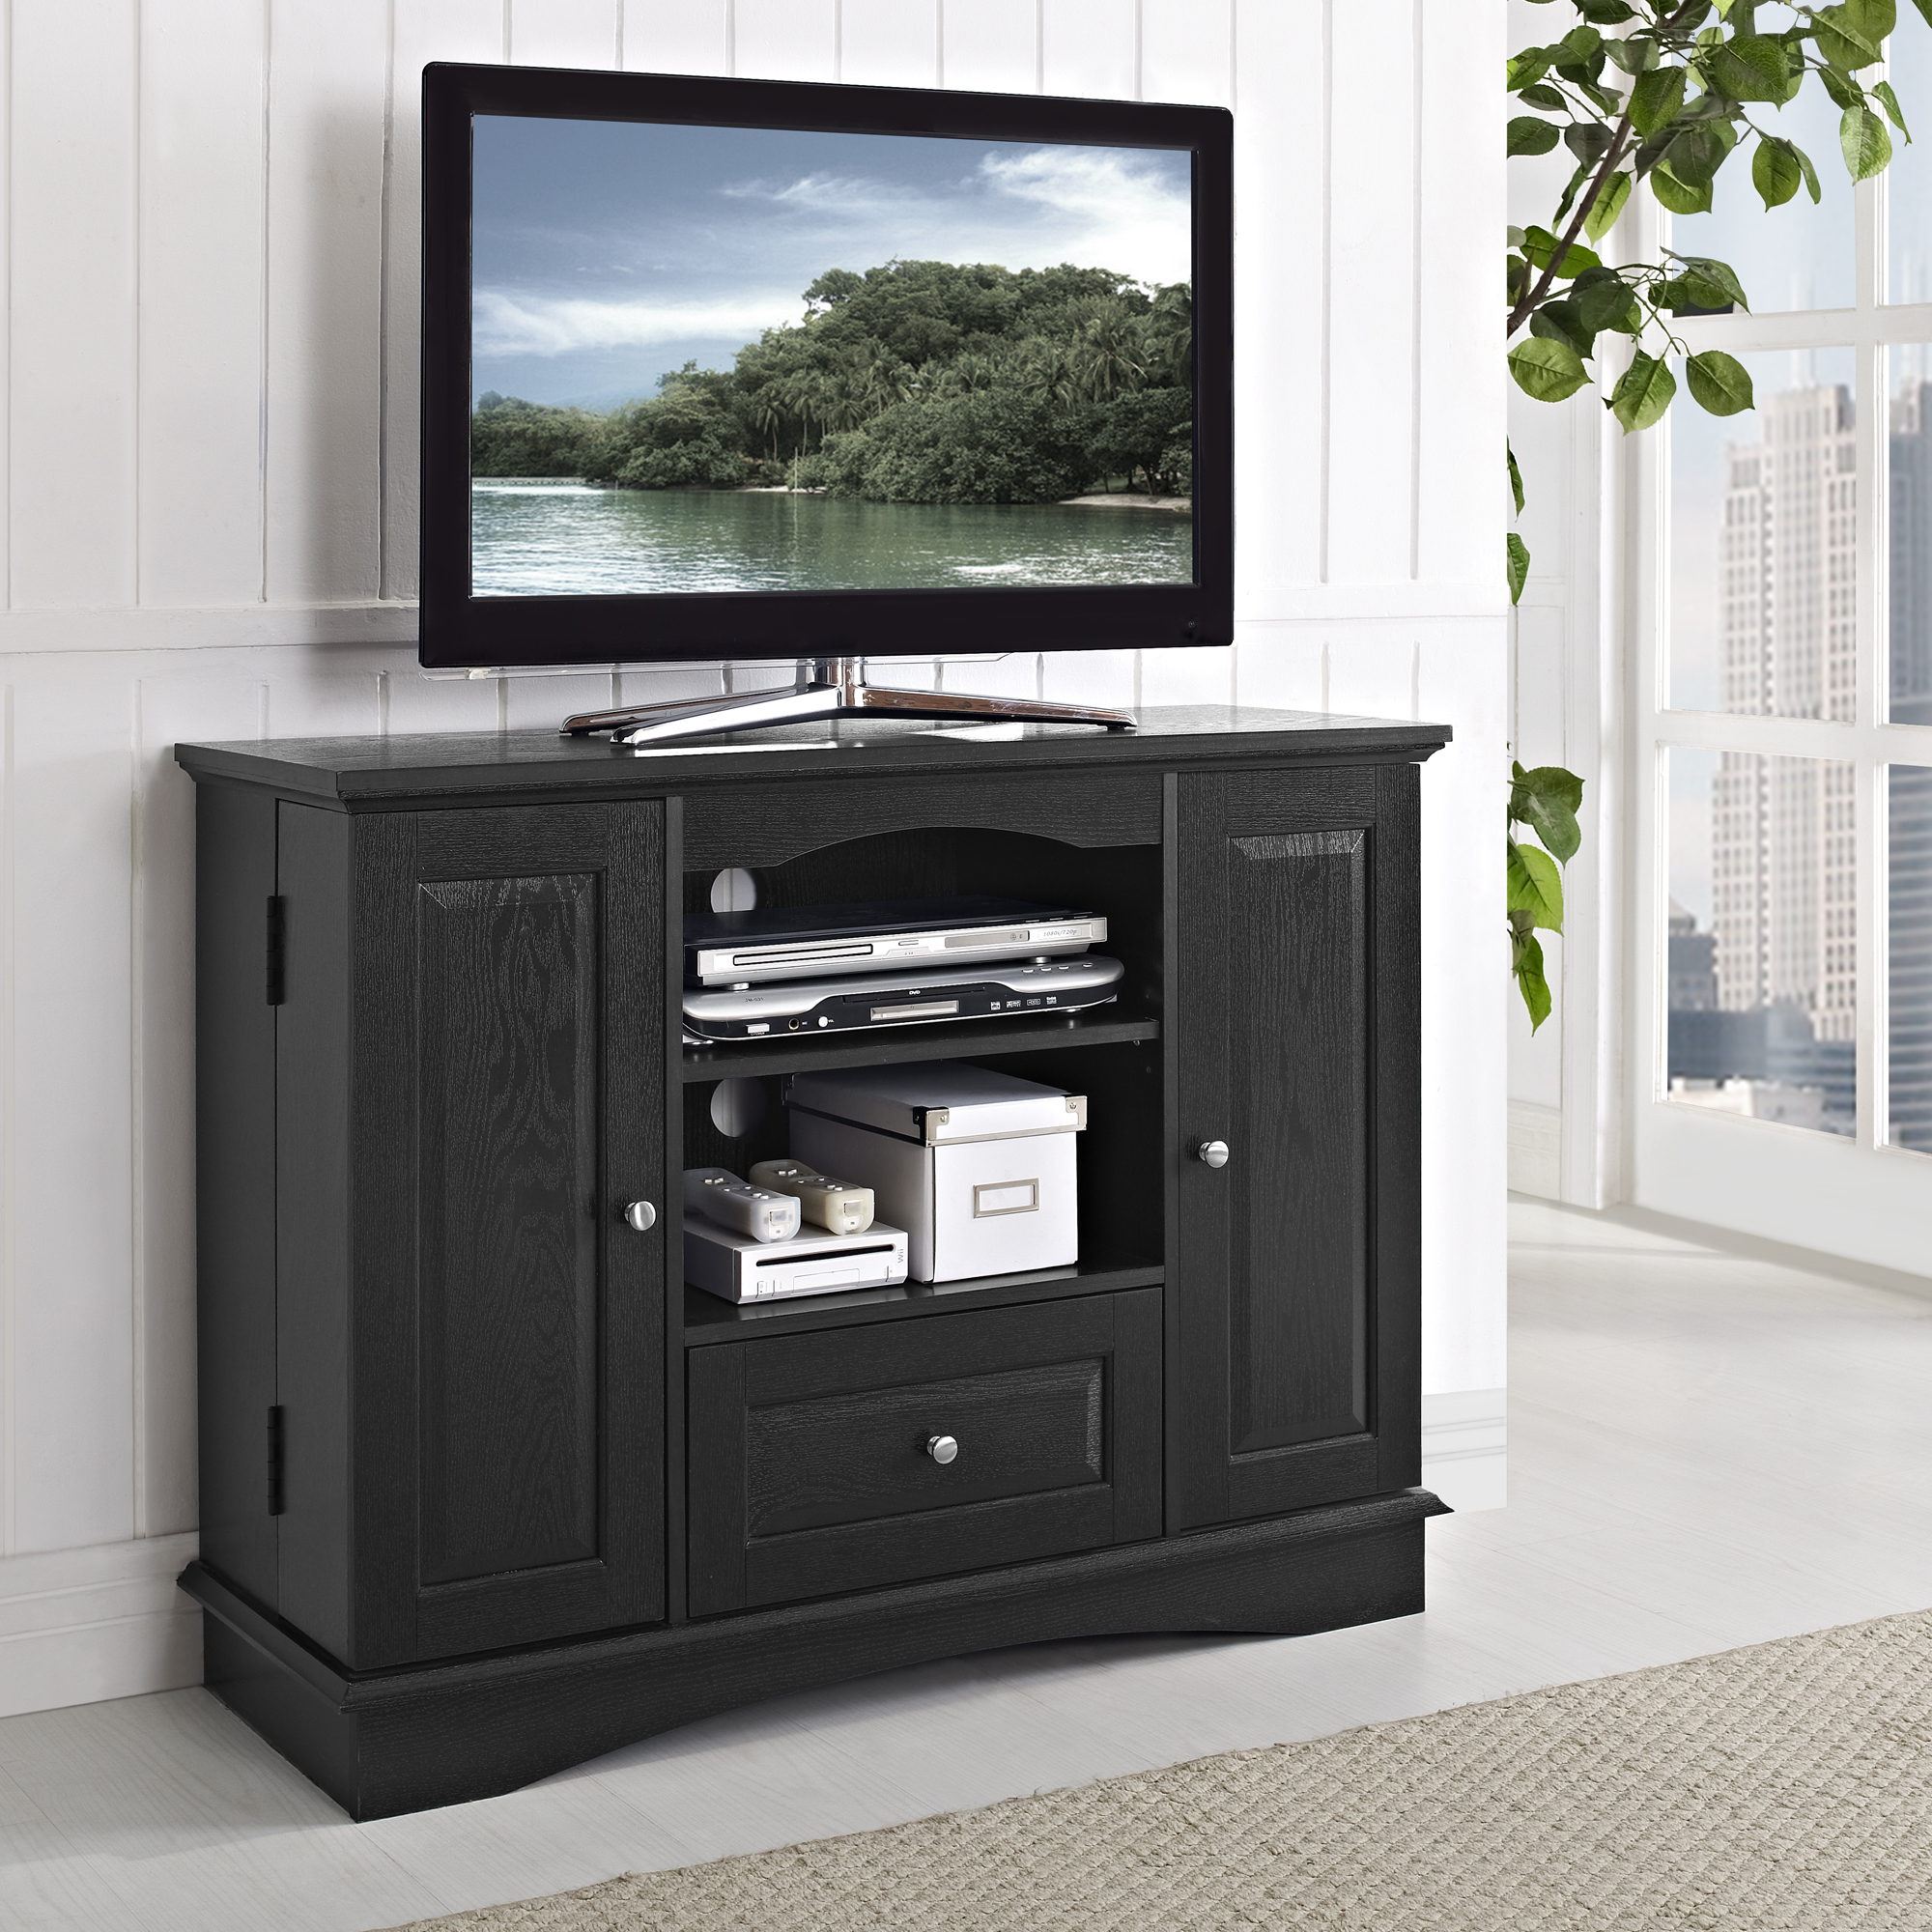 42 in. Black Wood TV Stand with Media Storage